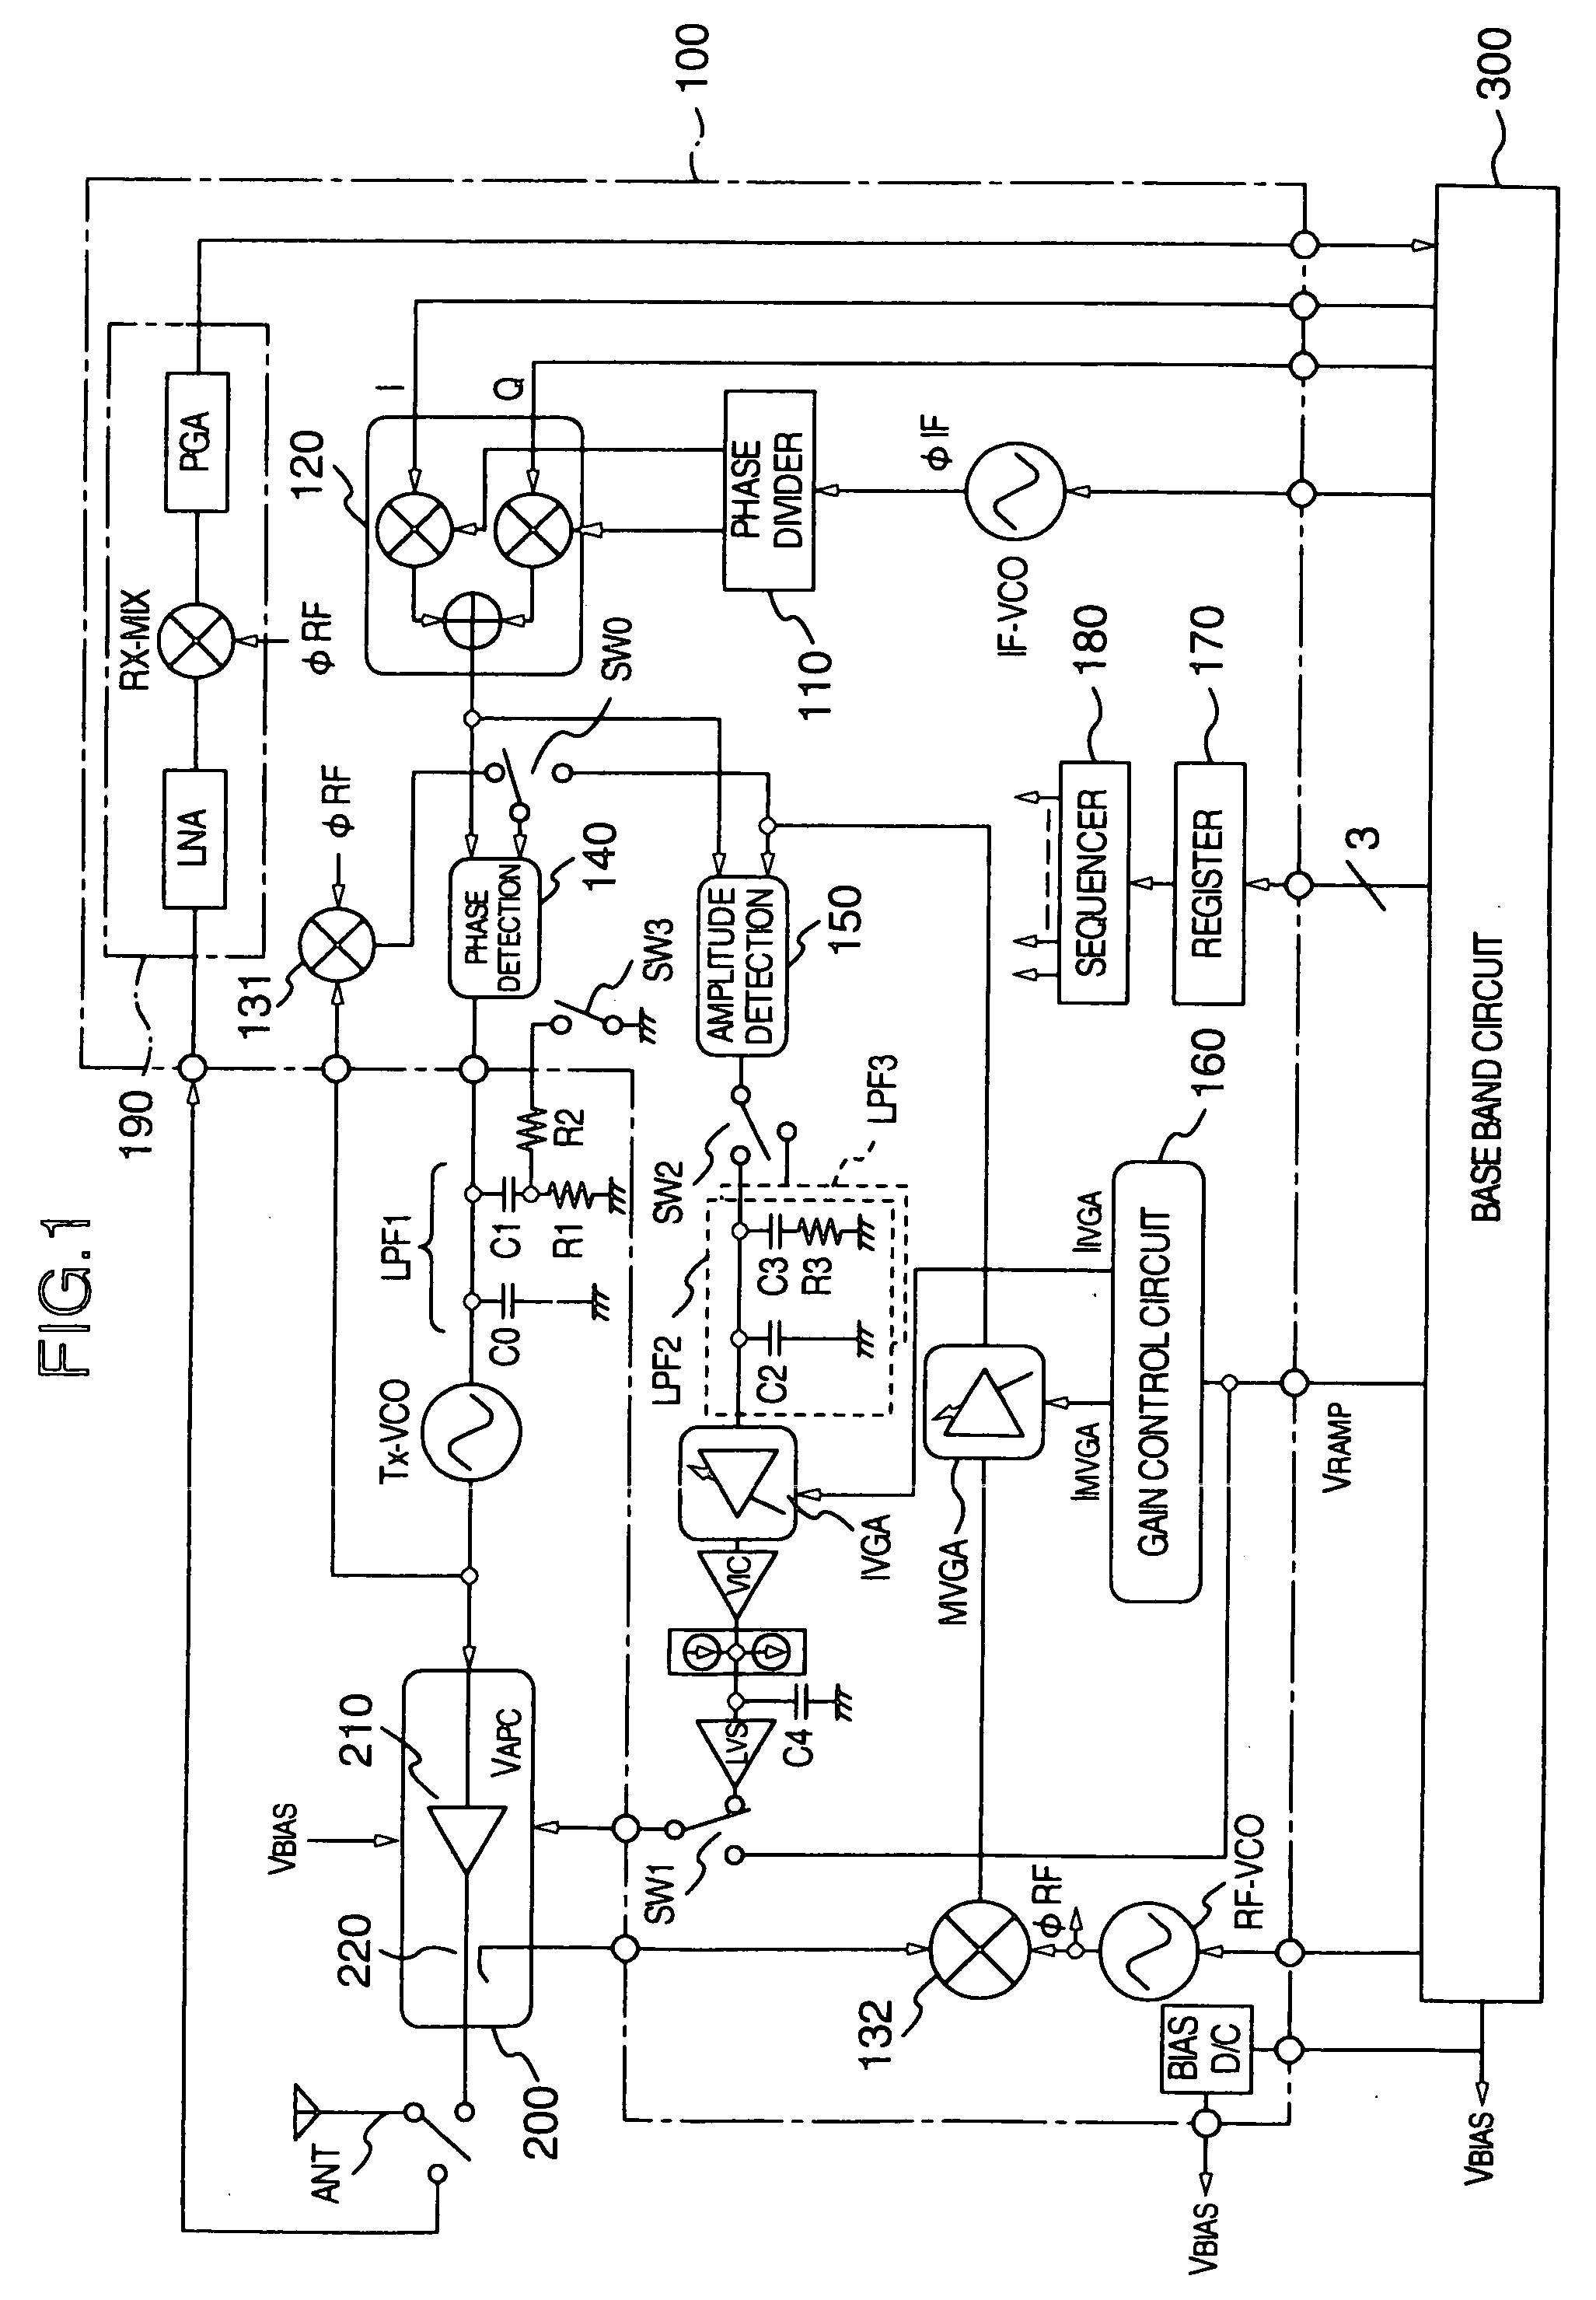 Transmitter and semiconductor integrated circuit for communication